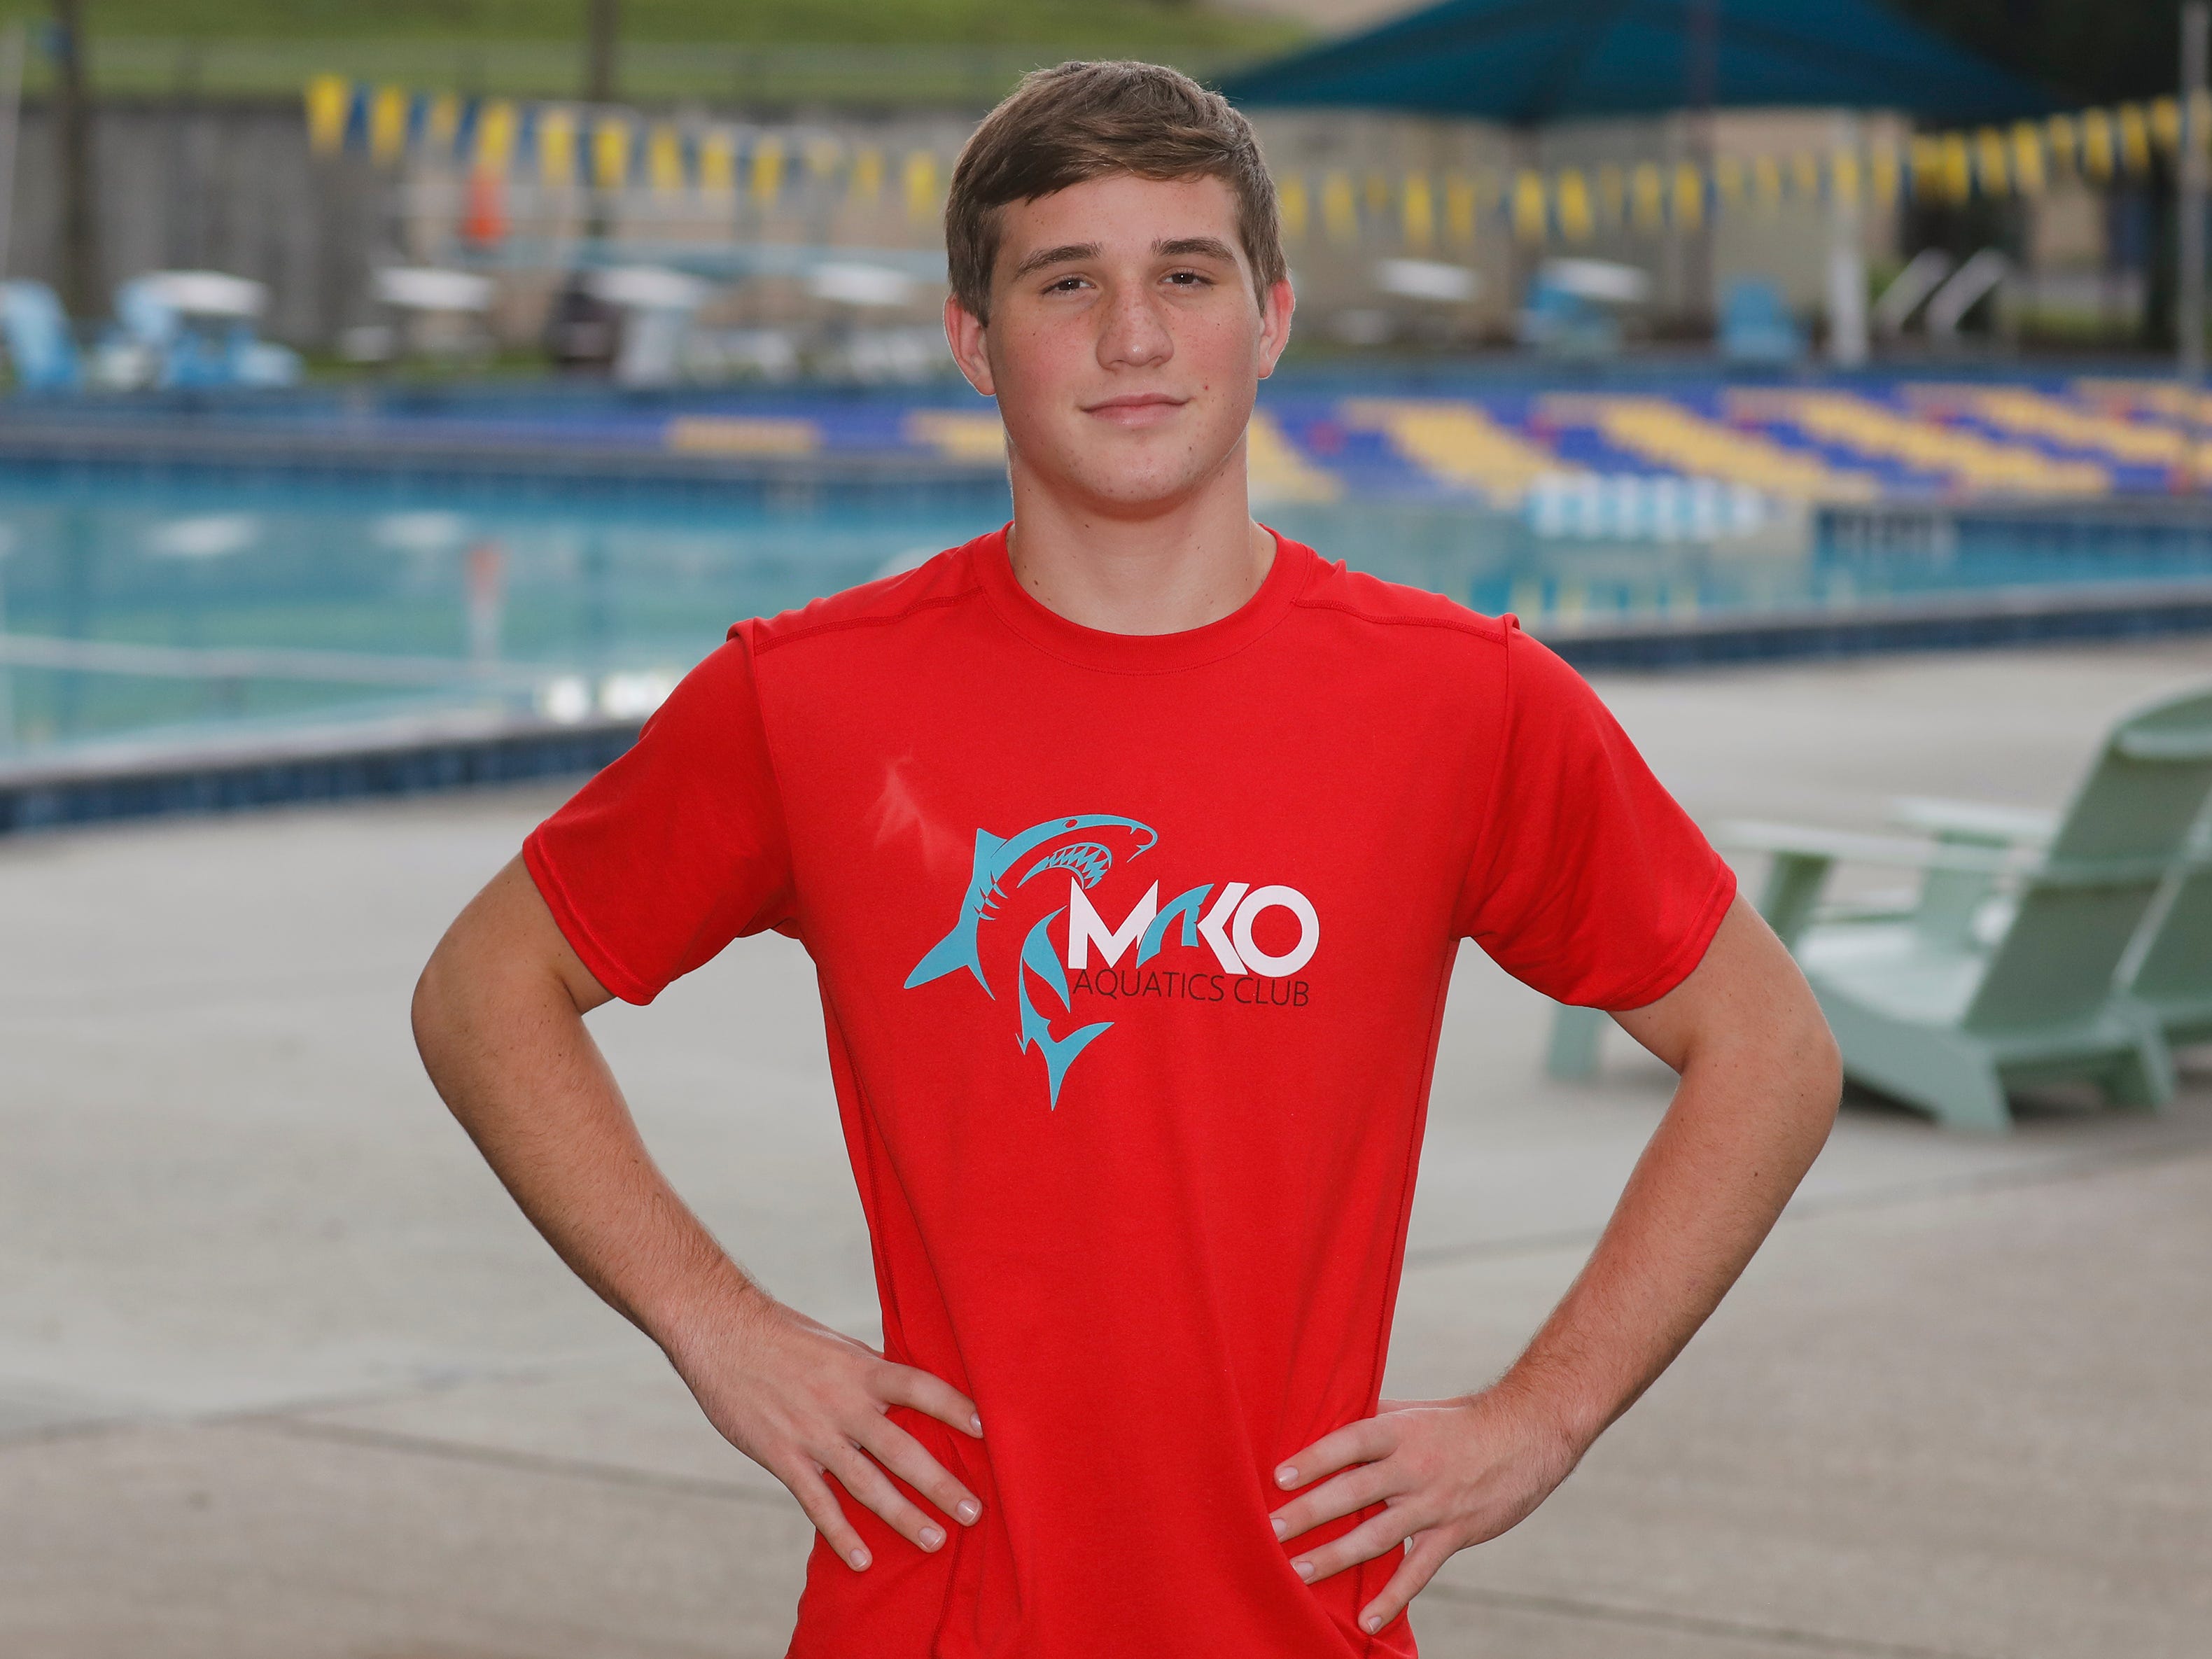 Brayden Dam swam for the Bahamas national team for two seasons. He now swims for George Jenkins High School. PIERRE DUCHARME/THE LEDGER